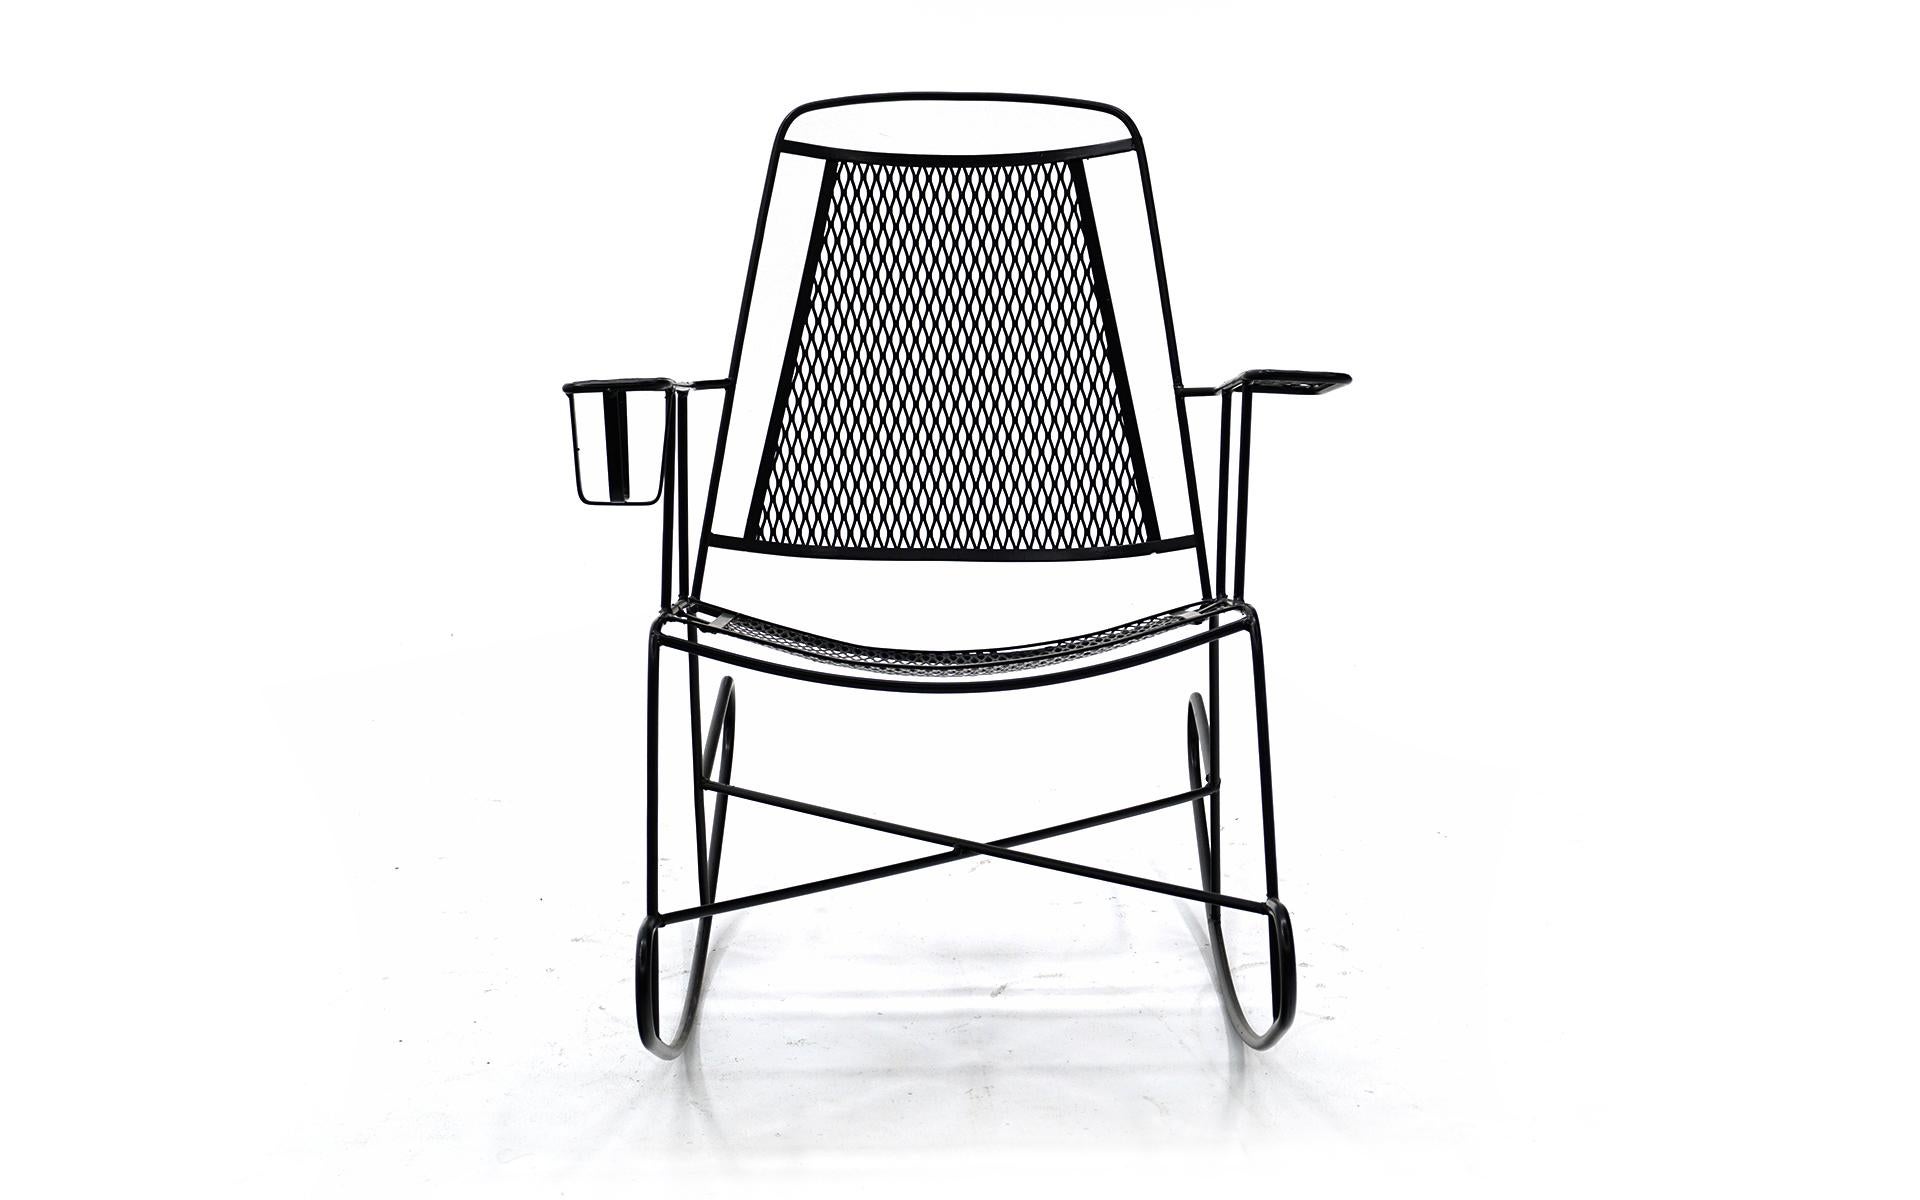 Patio rocker in wrought iron and stamped metal by John Salterini. This has been professionally media blasted and powder coated in a satin black finish. Looks and function like new. Very comfortable, complete with a built in cup / drink holder.